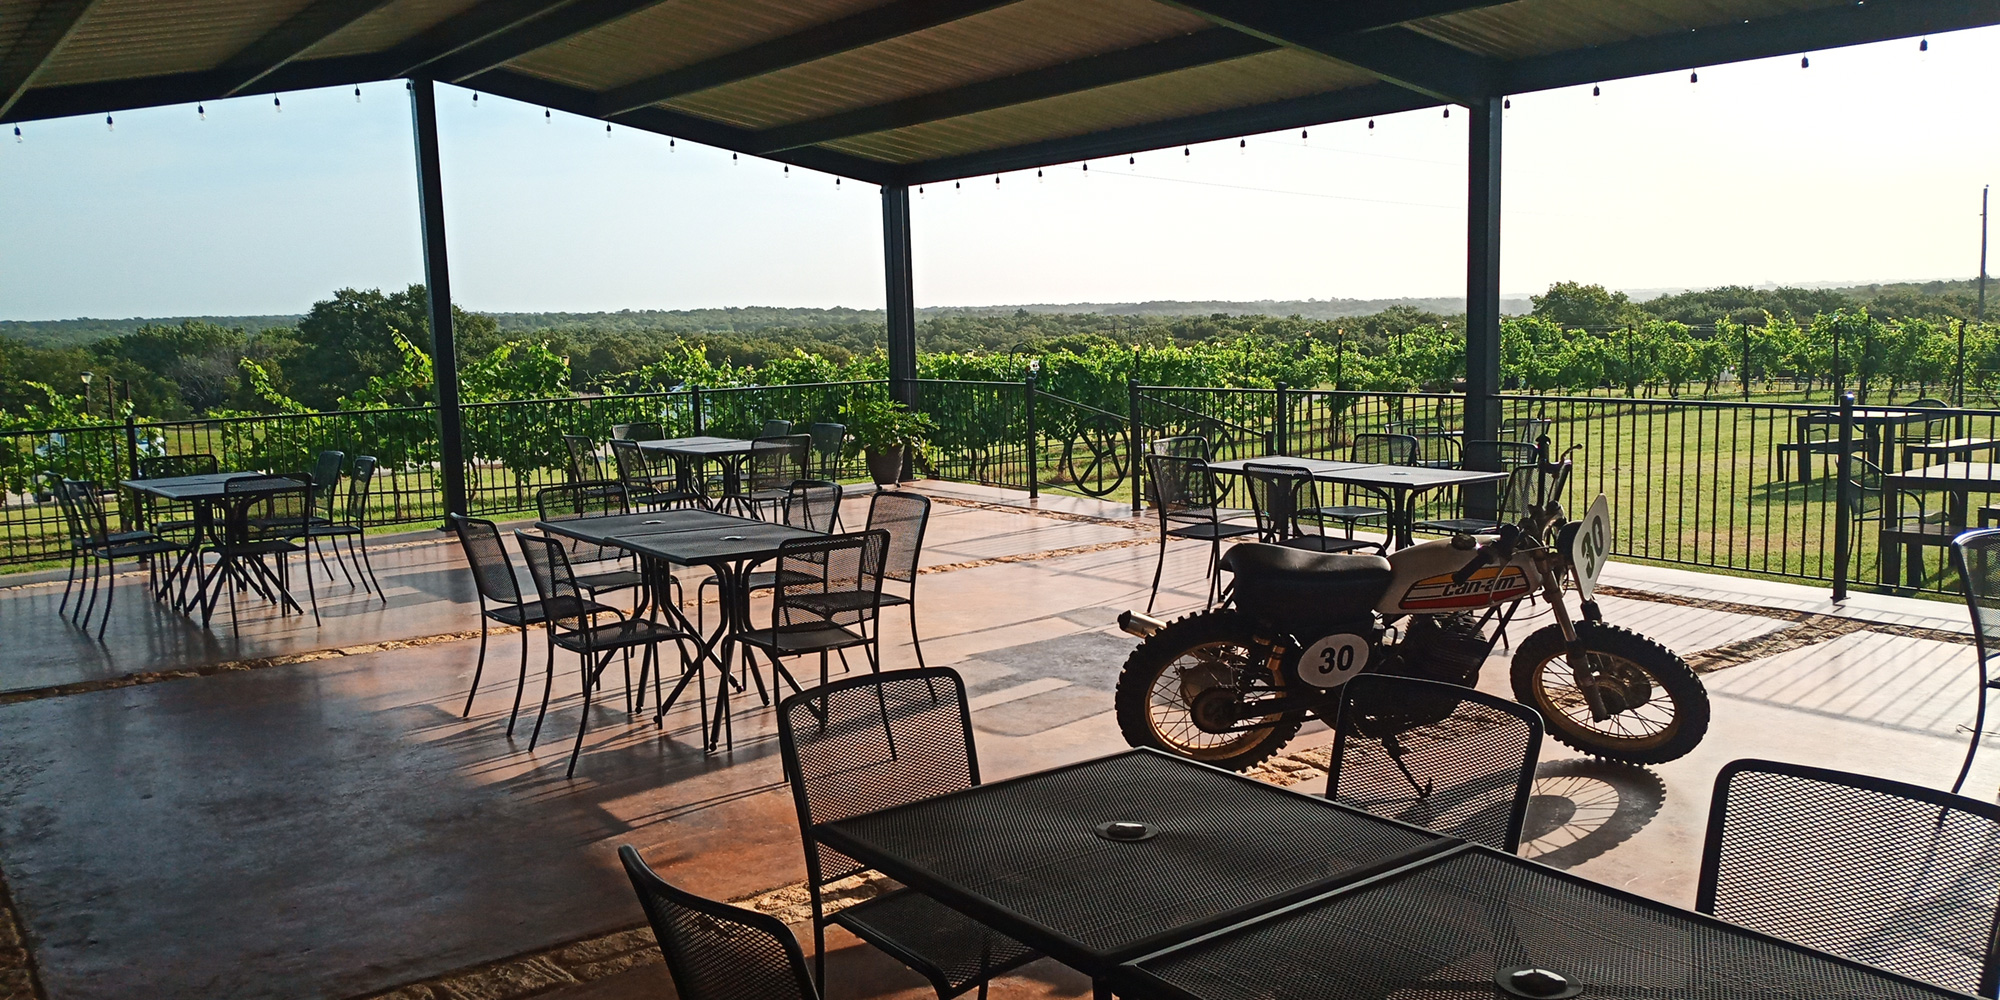 Shot from Tasting Room Seating Area Over Vineyards